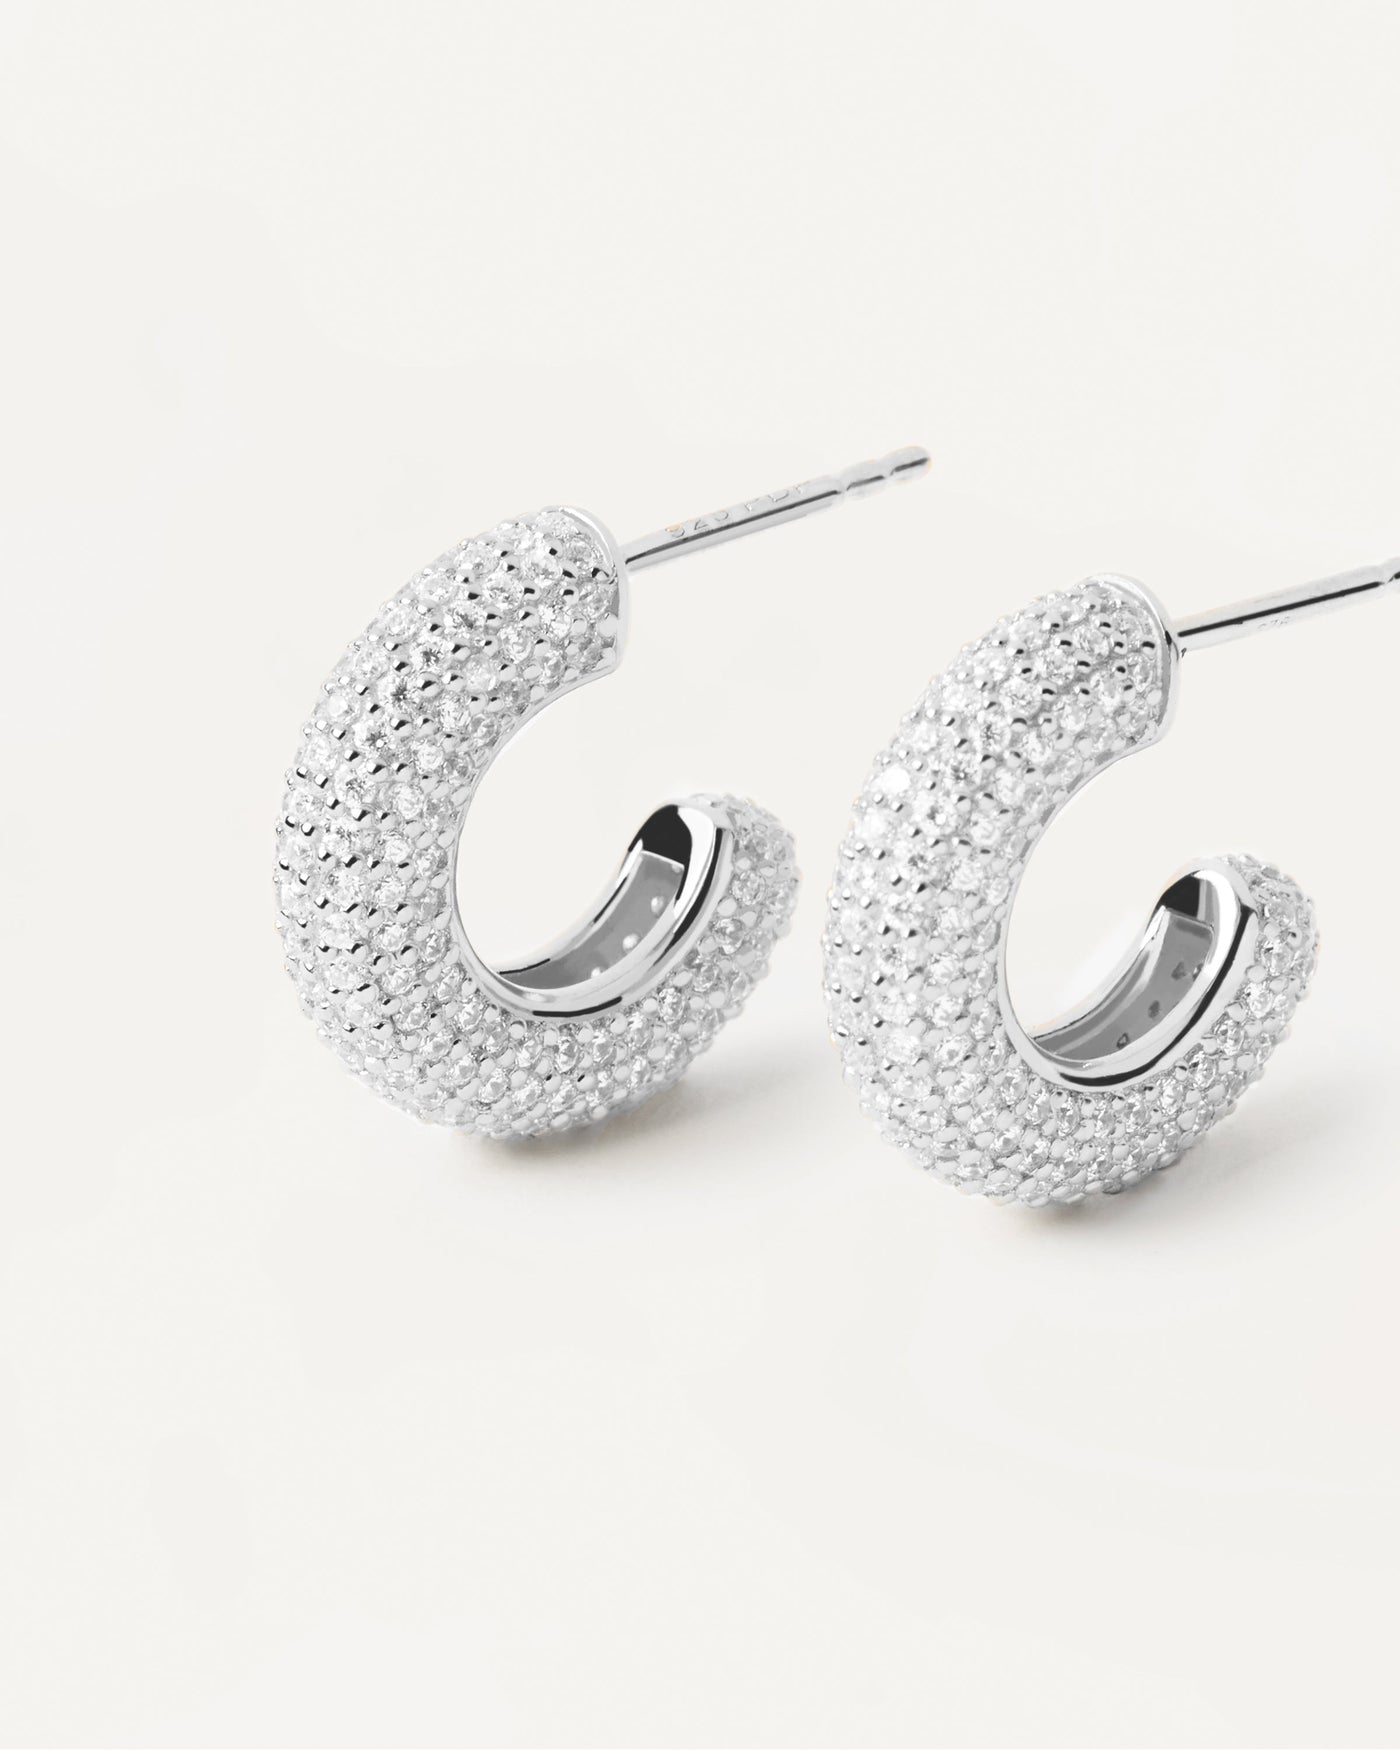 2023 Selection | King Silver Earrings. Silver hoop earrings with white zirconia. Get the latest arrival from PDPAOLA. Place your order safely and get this Best Seller. Free Shipping.